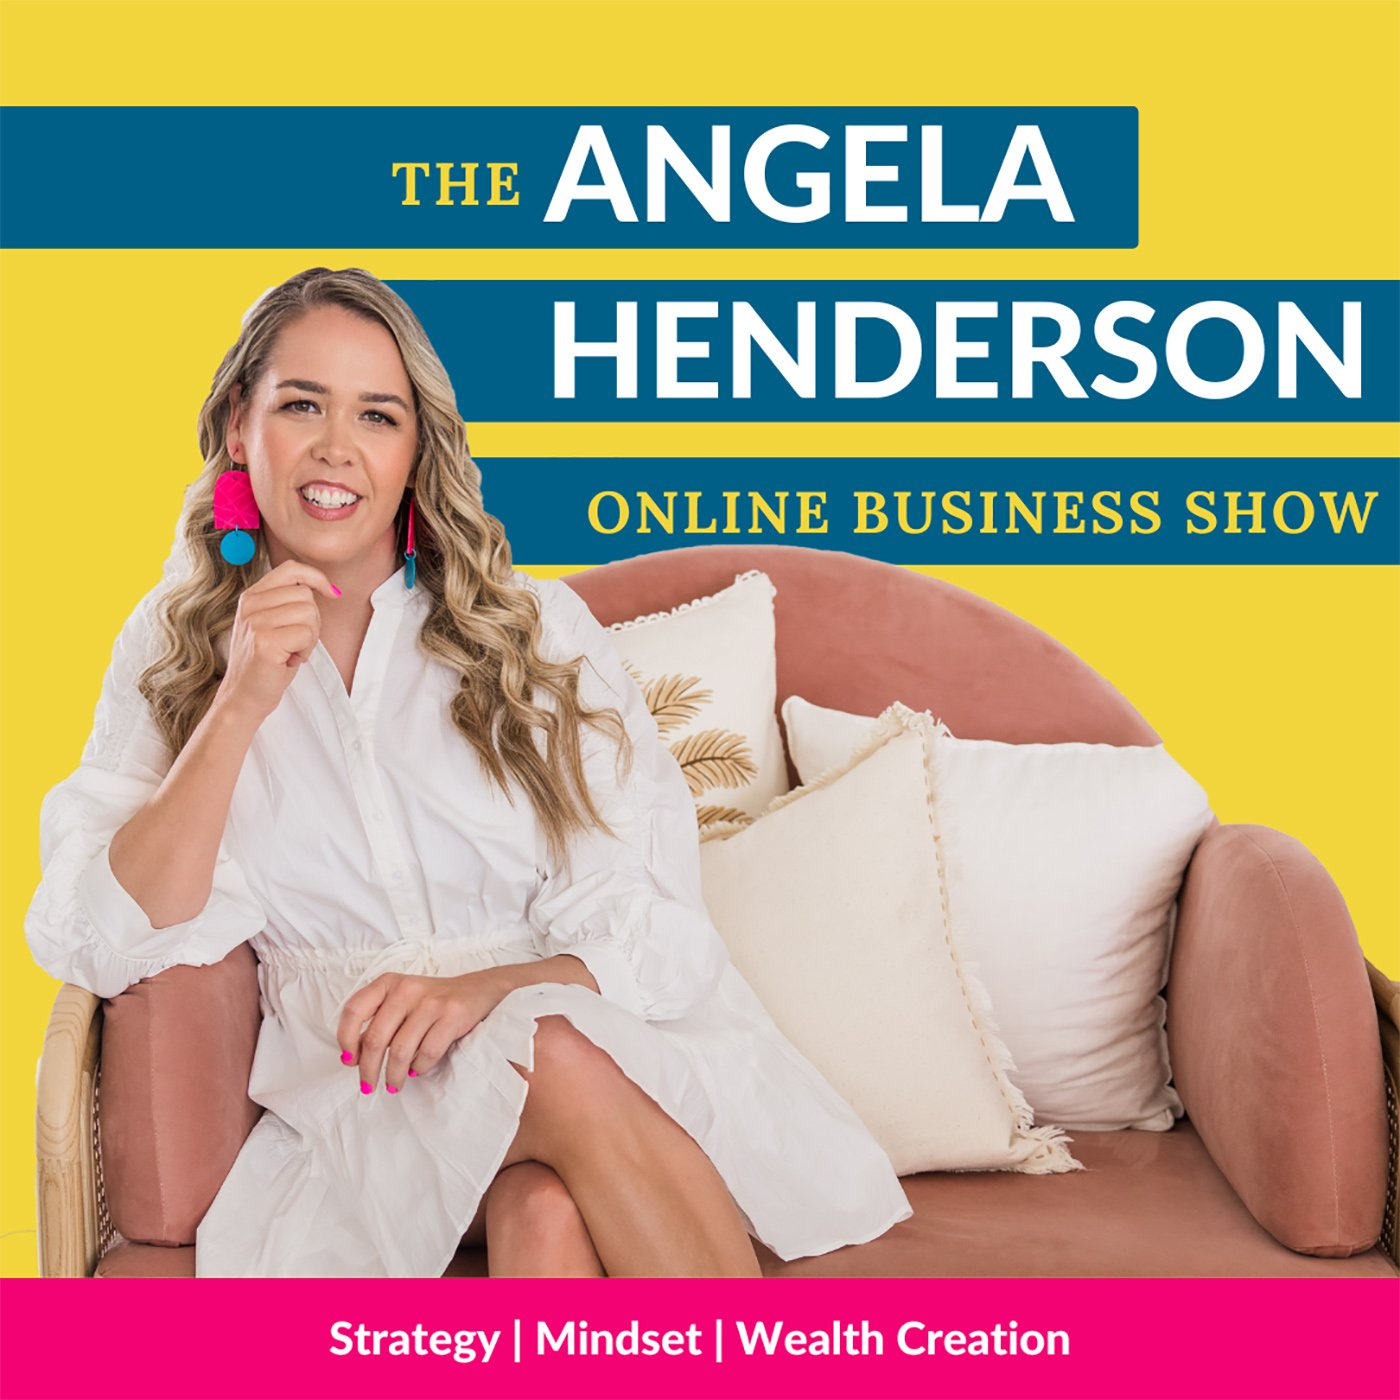 5 Ways to Make $5,000 Extra This Week in Sales with Angela Henderson